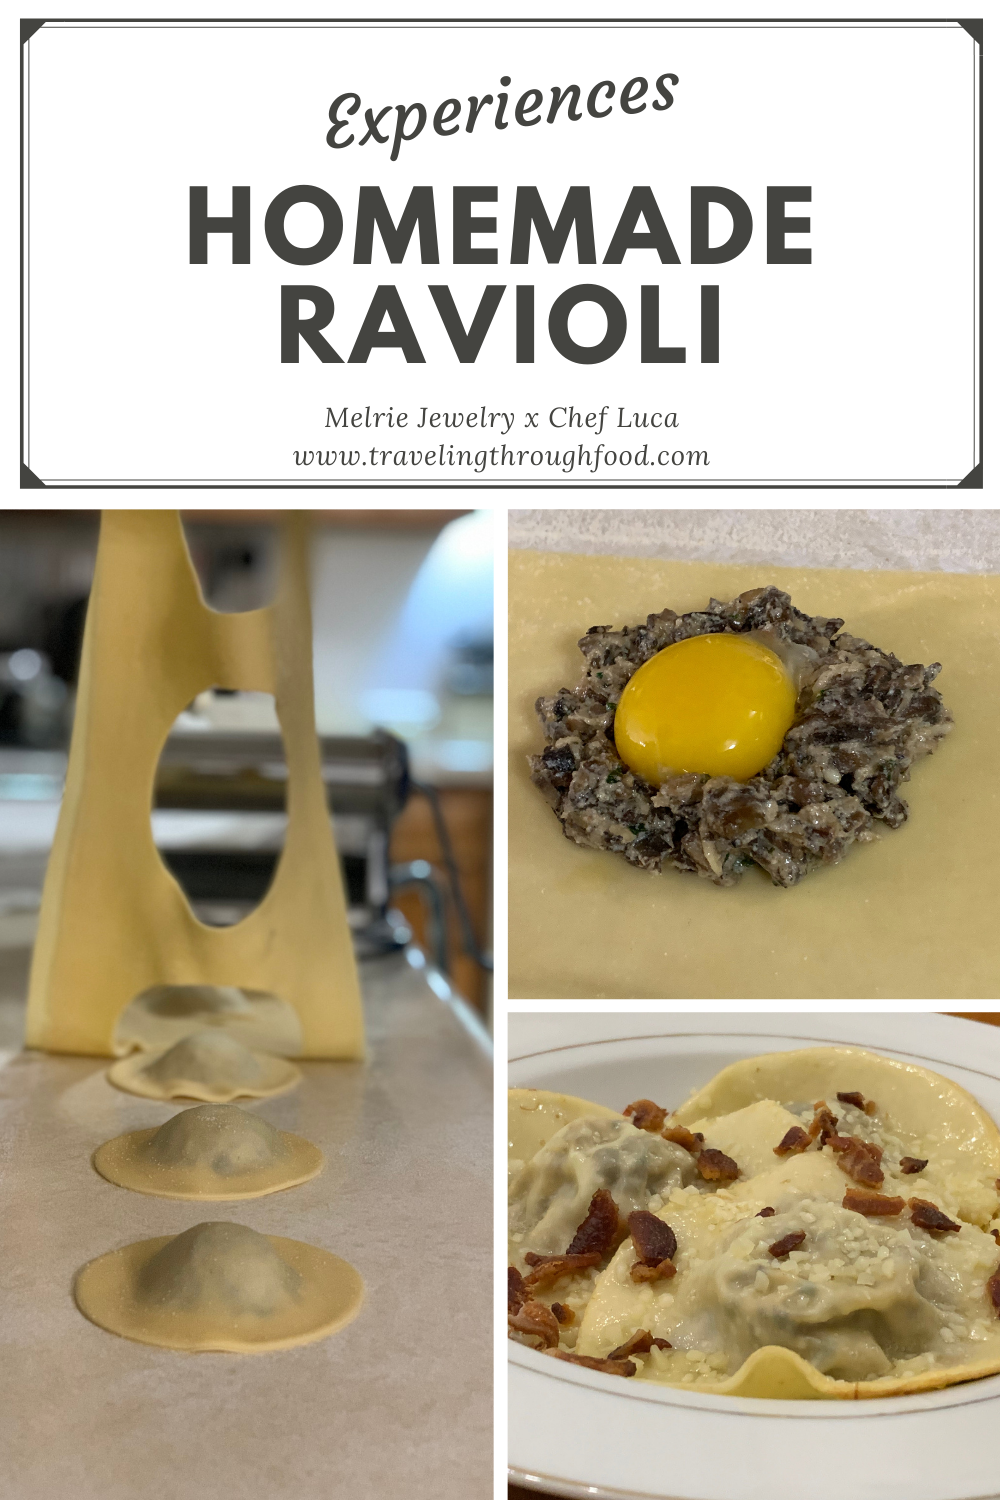 Homemade Ravioli Traveling Through Food Experience with Melrie Jewelry and Chef Luca